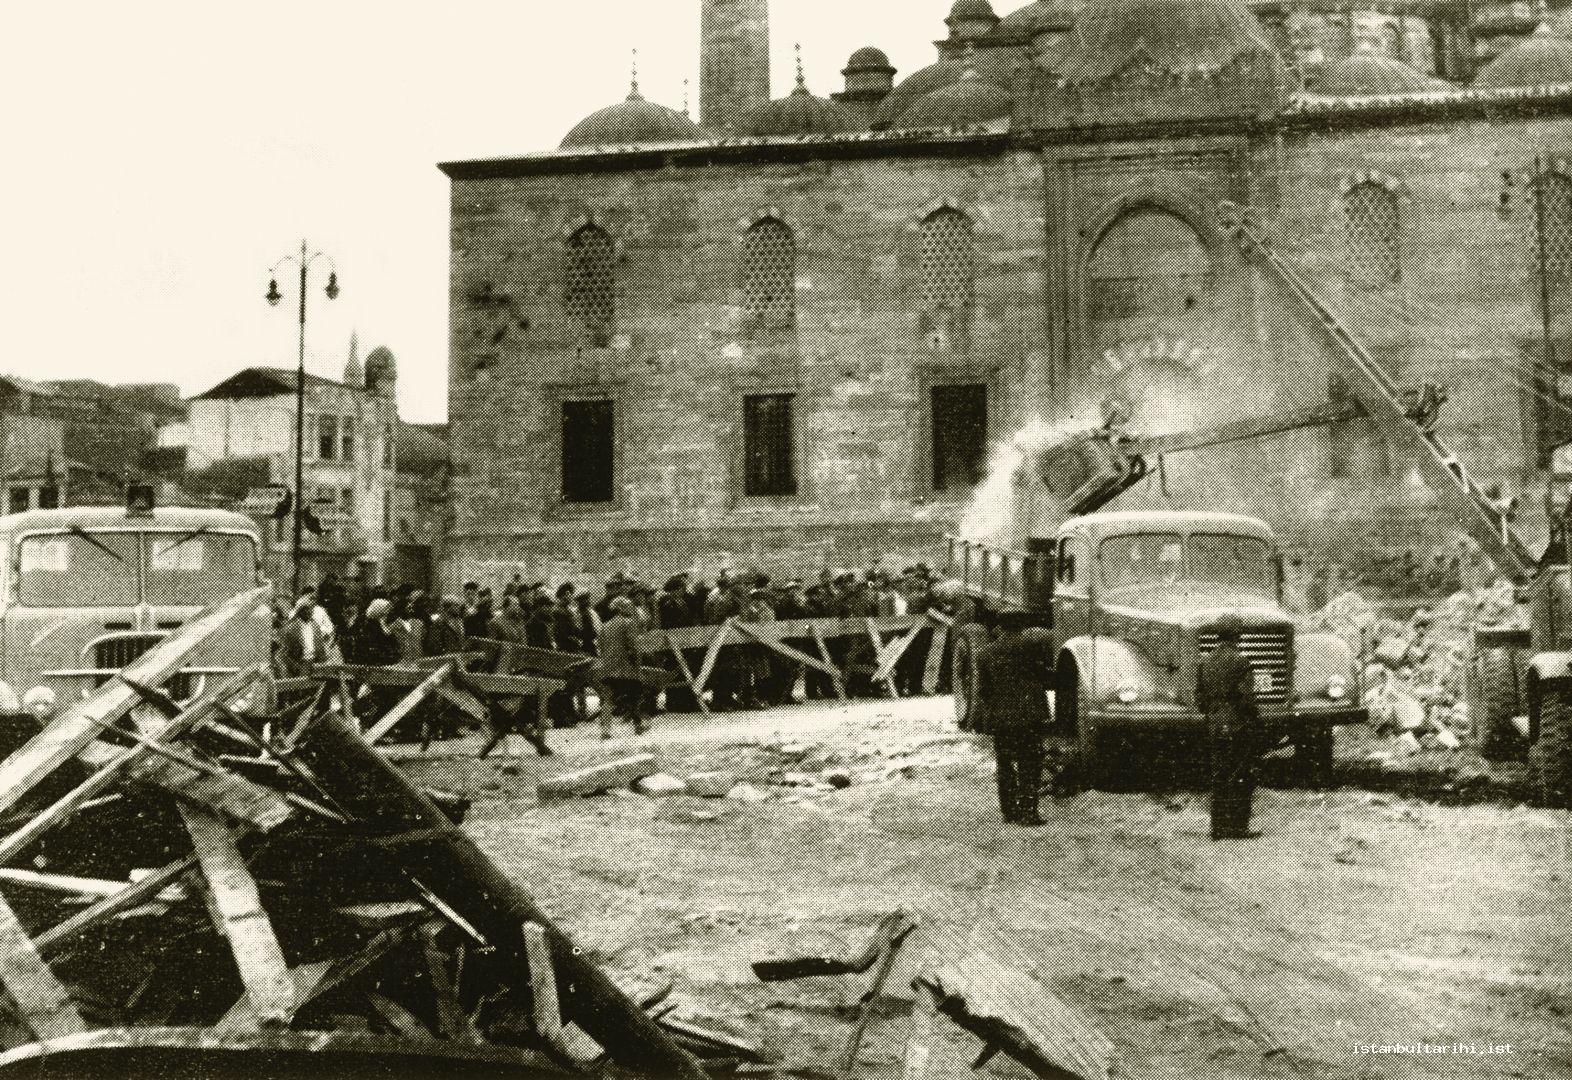 5- A photograph taken during the works of removing the old and shabby building around New Mosque in Eminönü Square (<em>İstanbul’un Kitabı</em>)